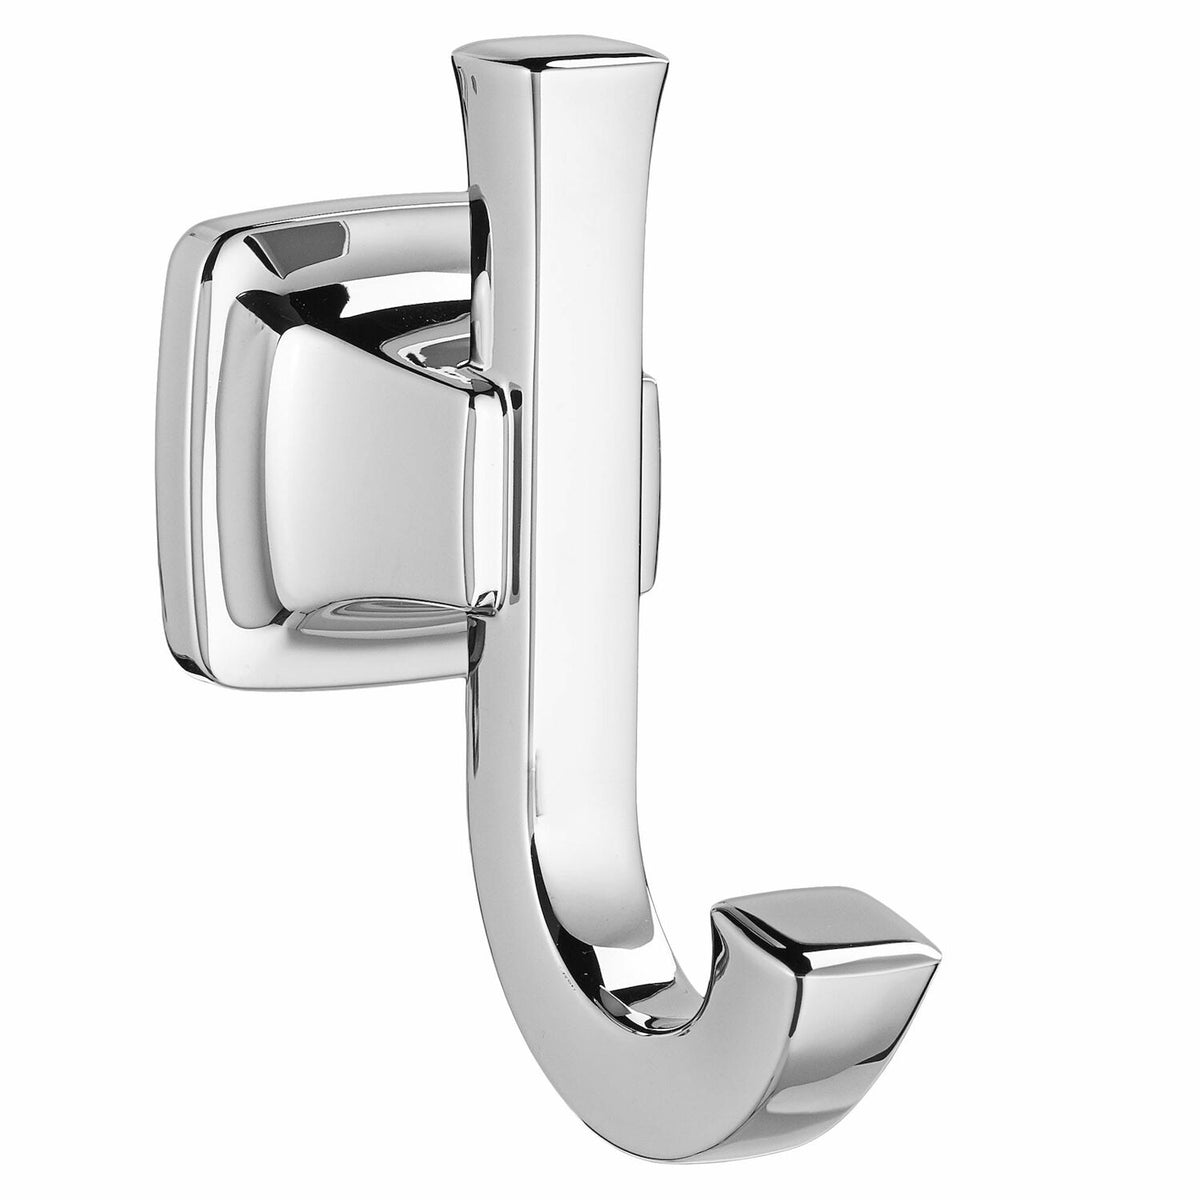 TOWNSEND DOUBLE ROBE HOOK